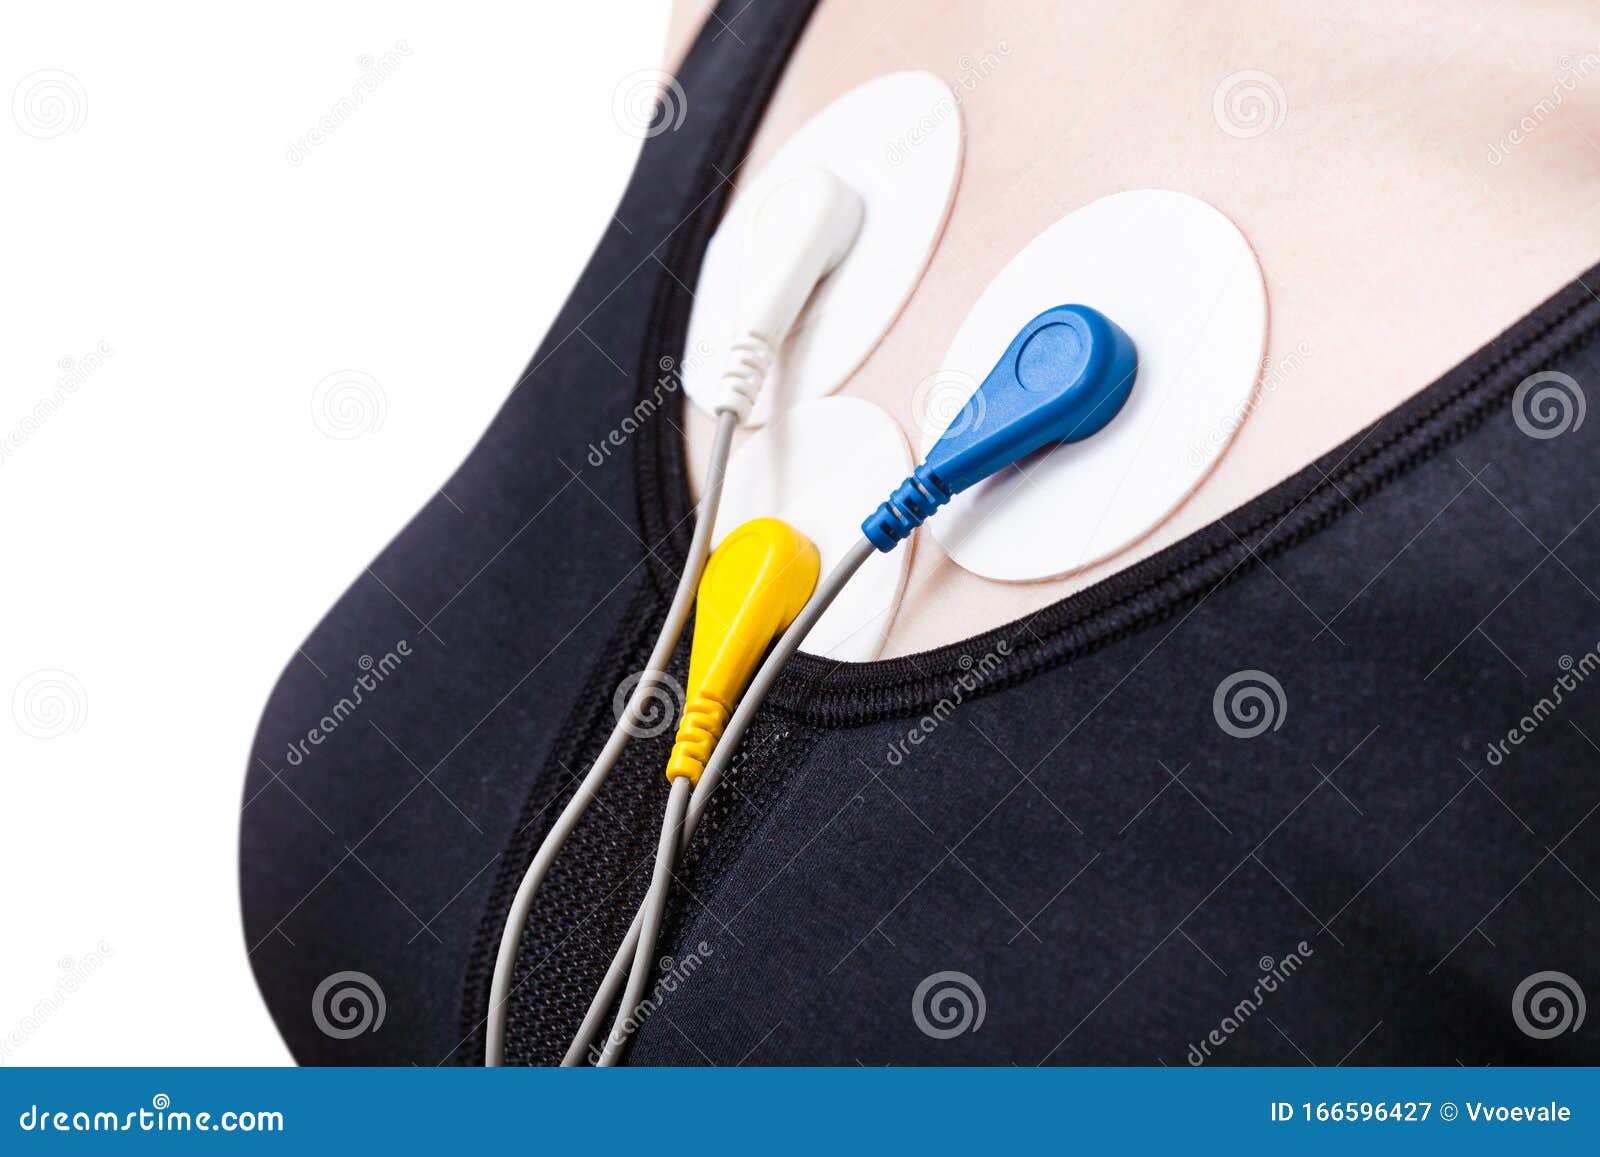 side view of electrodes of holter monitor on chest